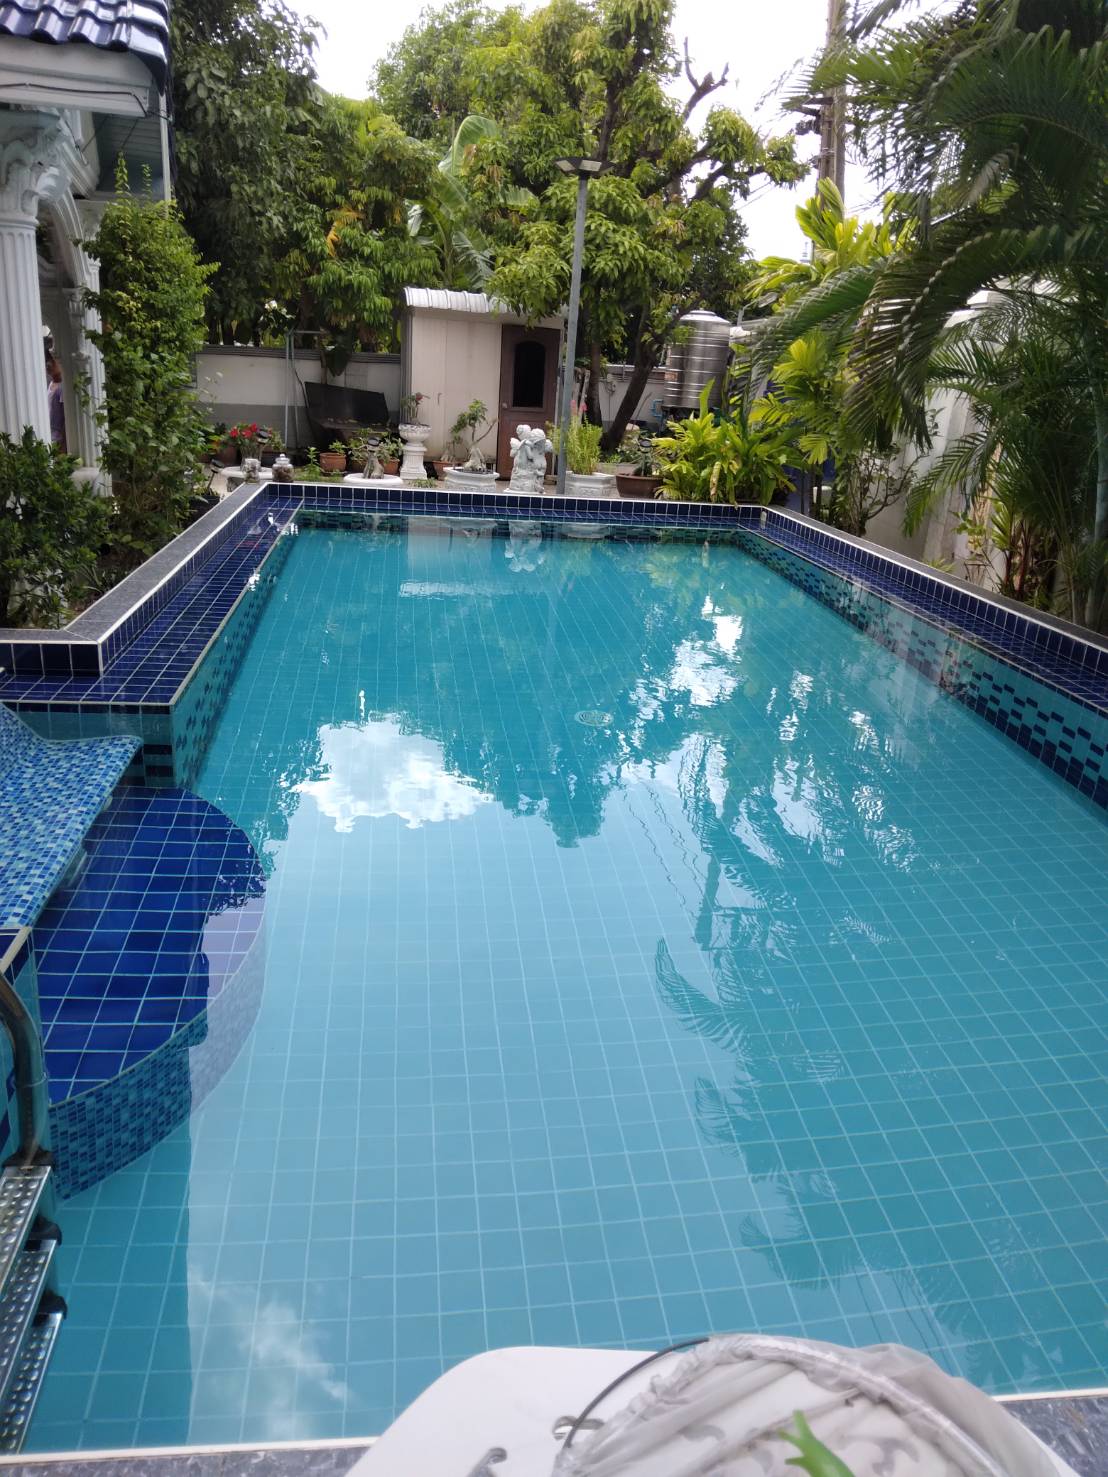 Sale single house with private pool large area  Nice House with bigger land area so beautiful designed Thai-Europe wooden teak  inside with big pool รูปที่ 1